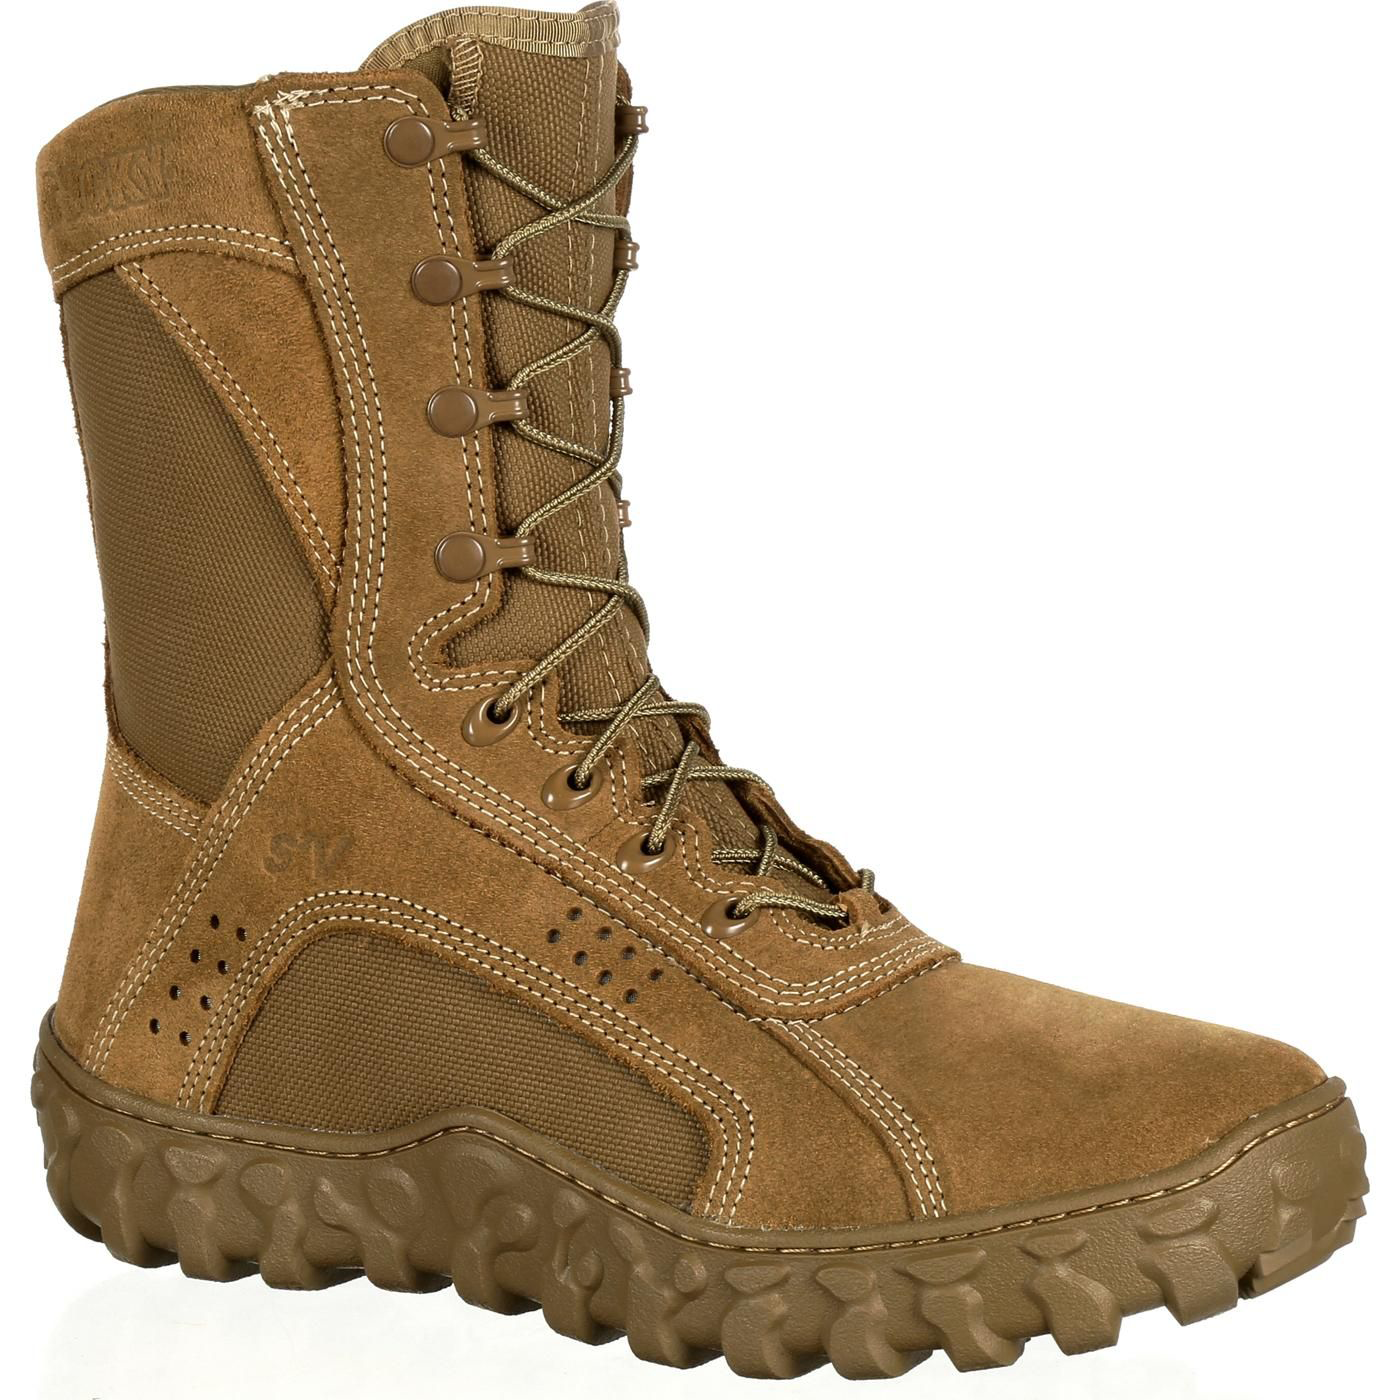 Rocky S2V Tactical Military Boots for Men - Coyote Brown - 10.5W